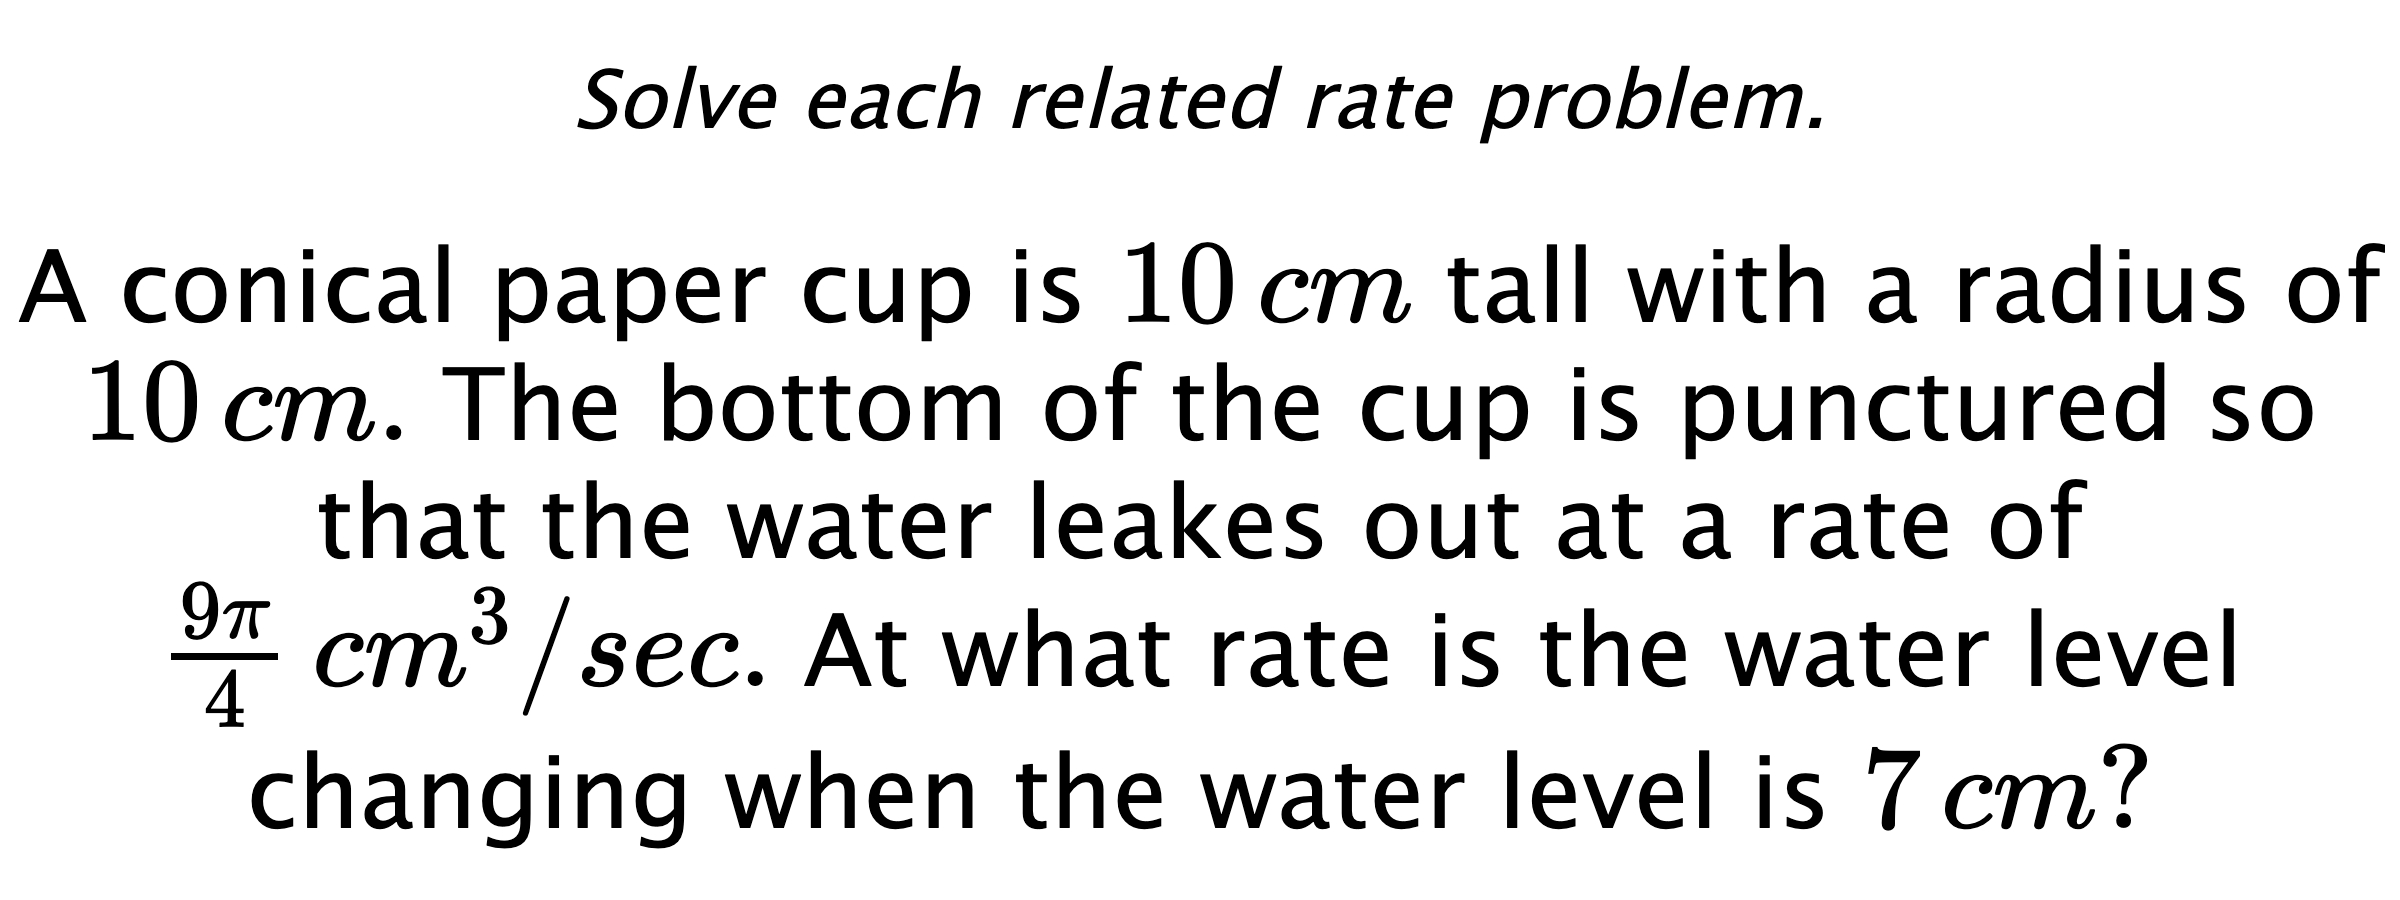 Solve each related rate problem. A conical paper cup is $10\,cm$ tall with a radius of $10\,cm.$ The bottom of the cup is punctured so that the water leakes out at a rate of $\frac{9\pi}{4} \,cm^{3}/sec.$ At what rate is the water level changing when the water level is $7\,cm?$